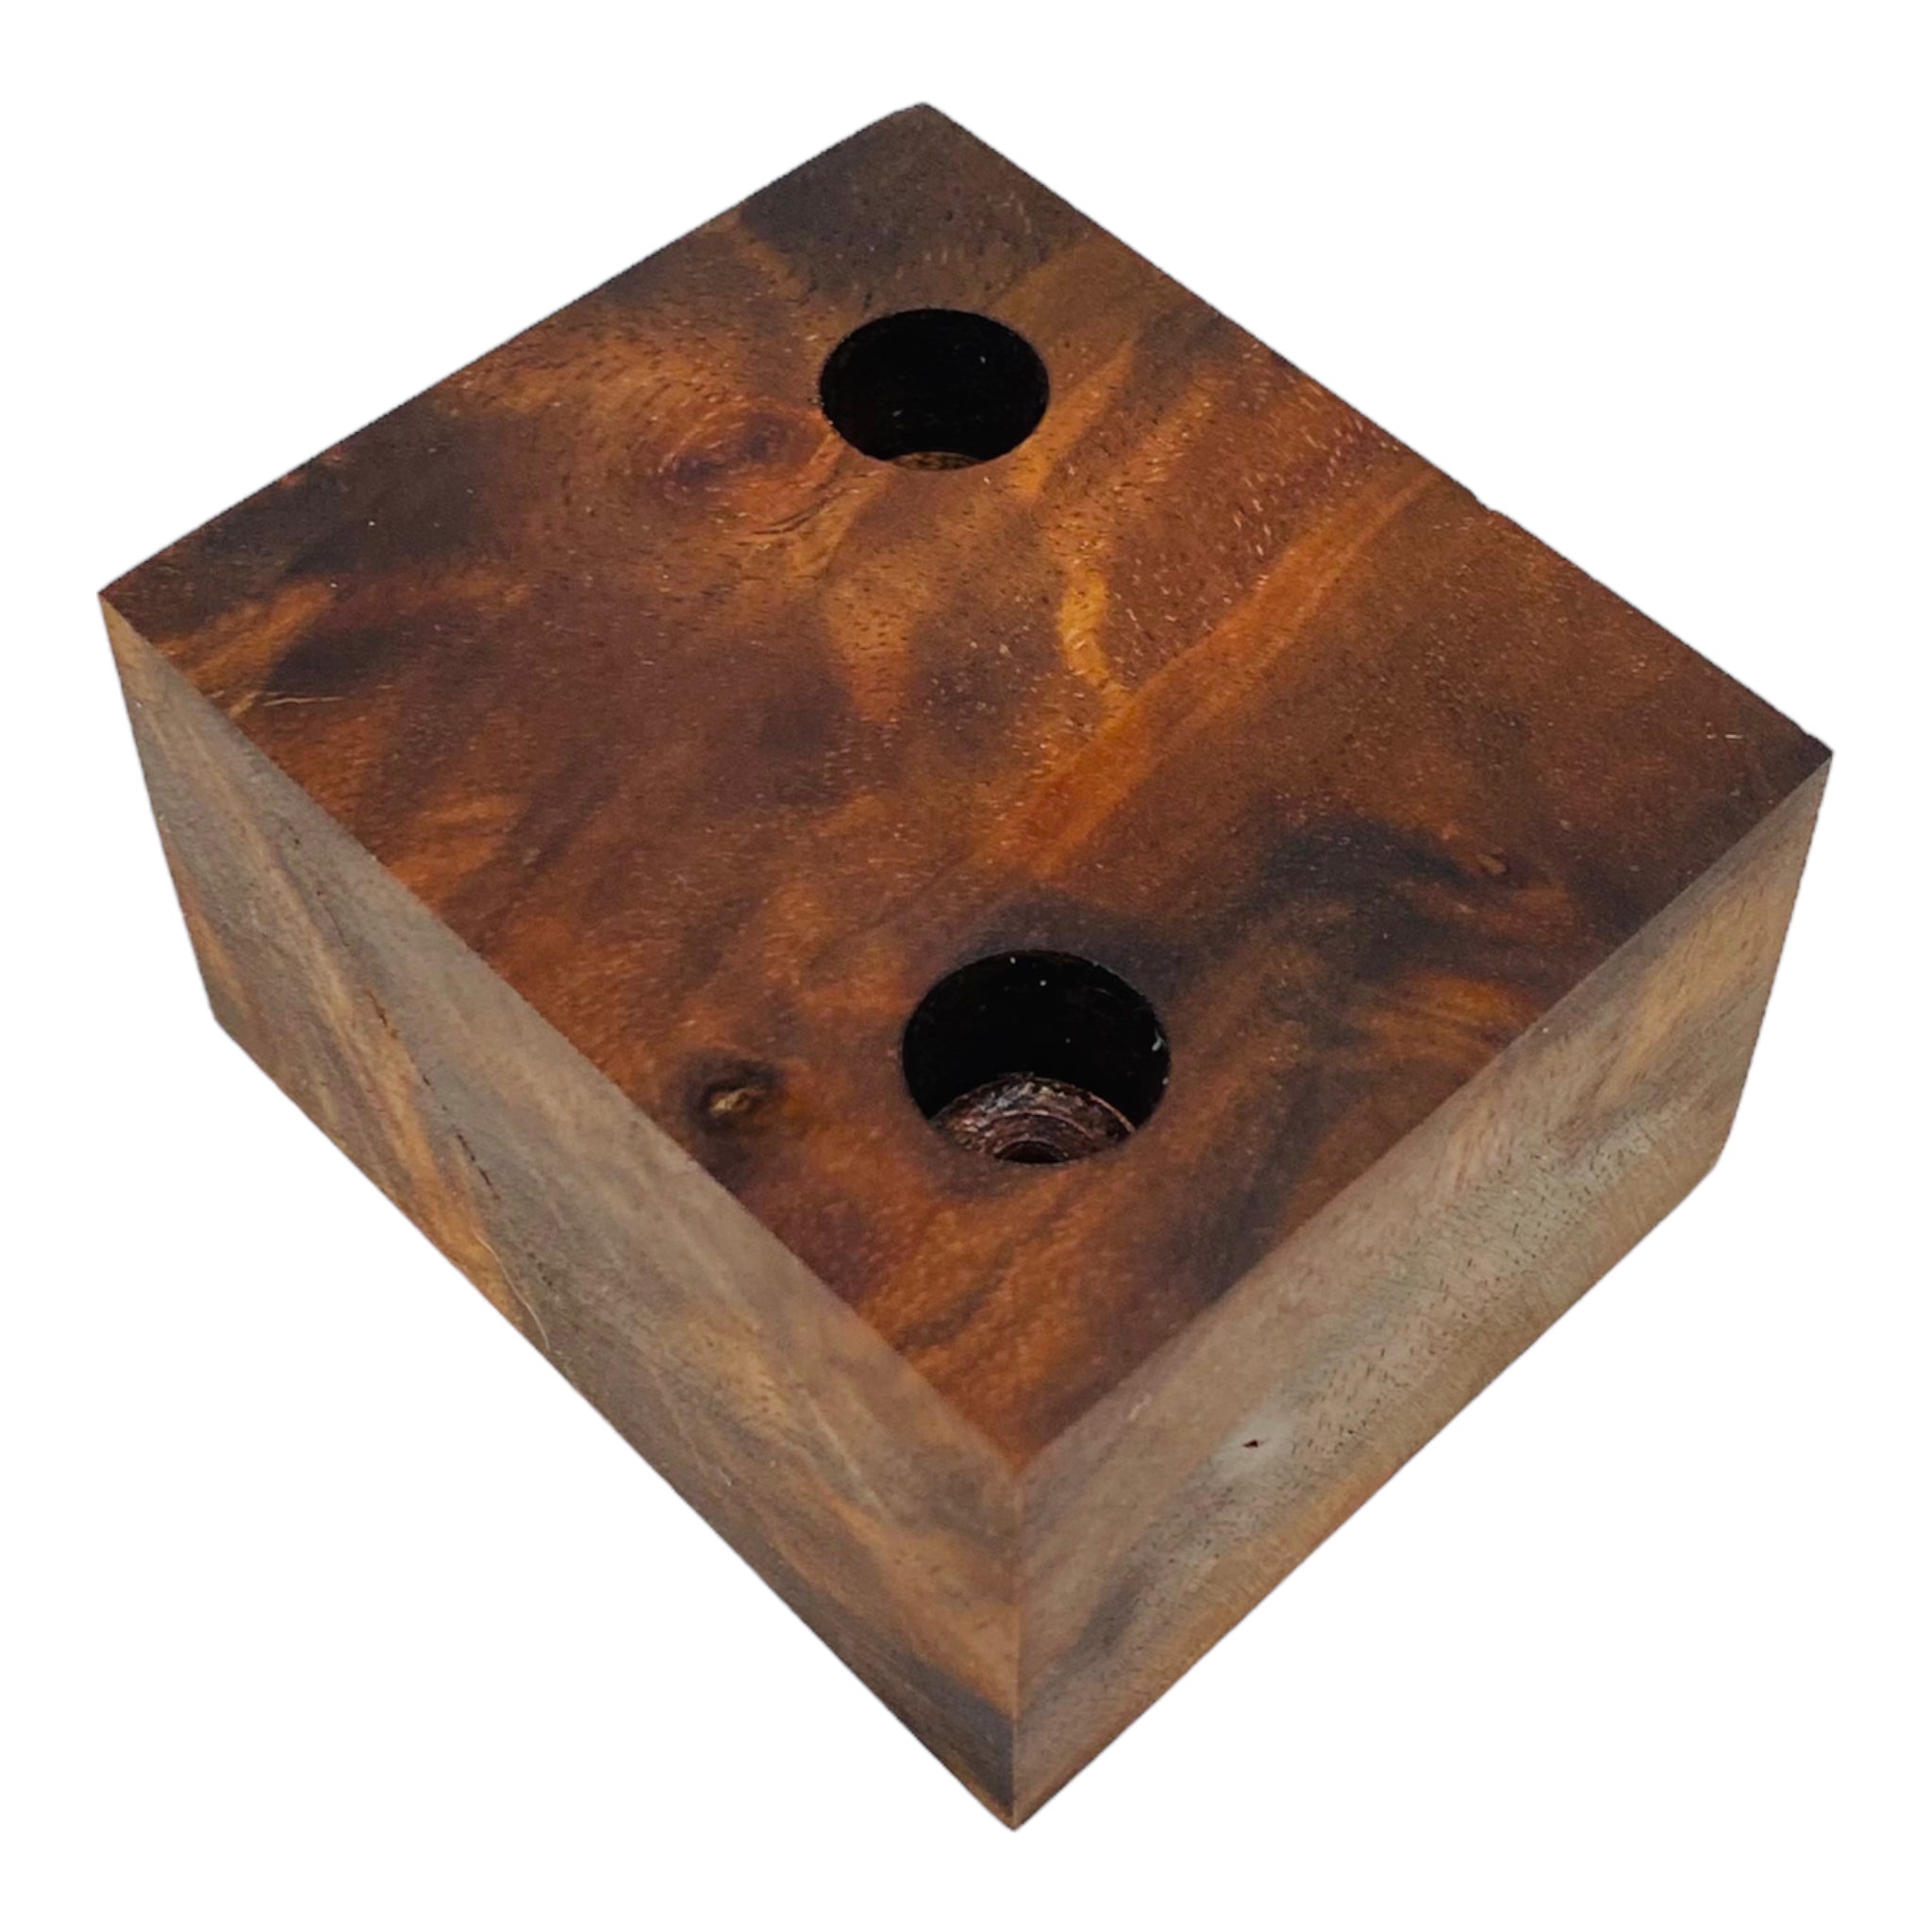 2 Hole Wood Display Stand Holder For 14mm Bong Bowl Pieces Or Quartz Bangers Black Walnut Burl perfect for displaying bong bowls, quartz bangers, marbles, and carb caps